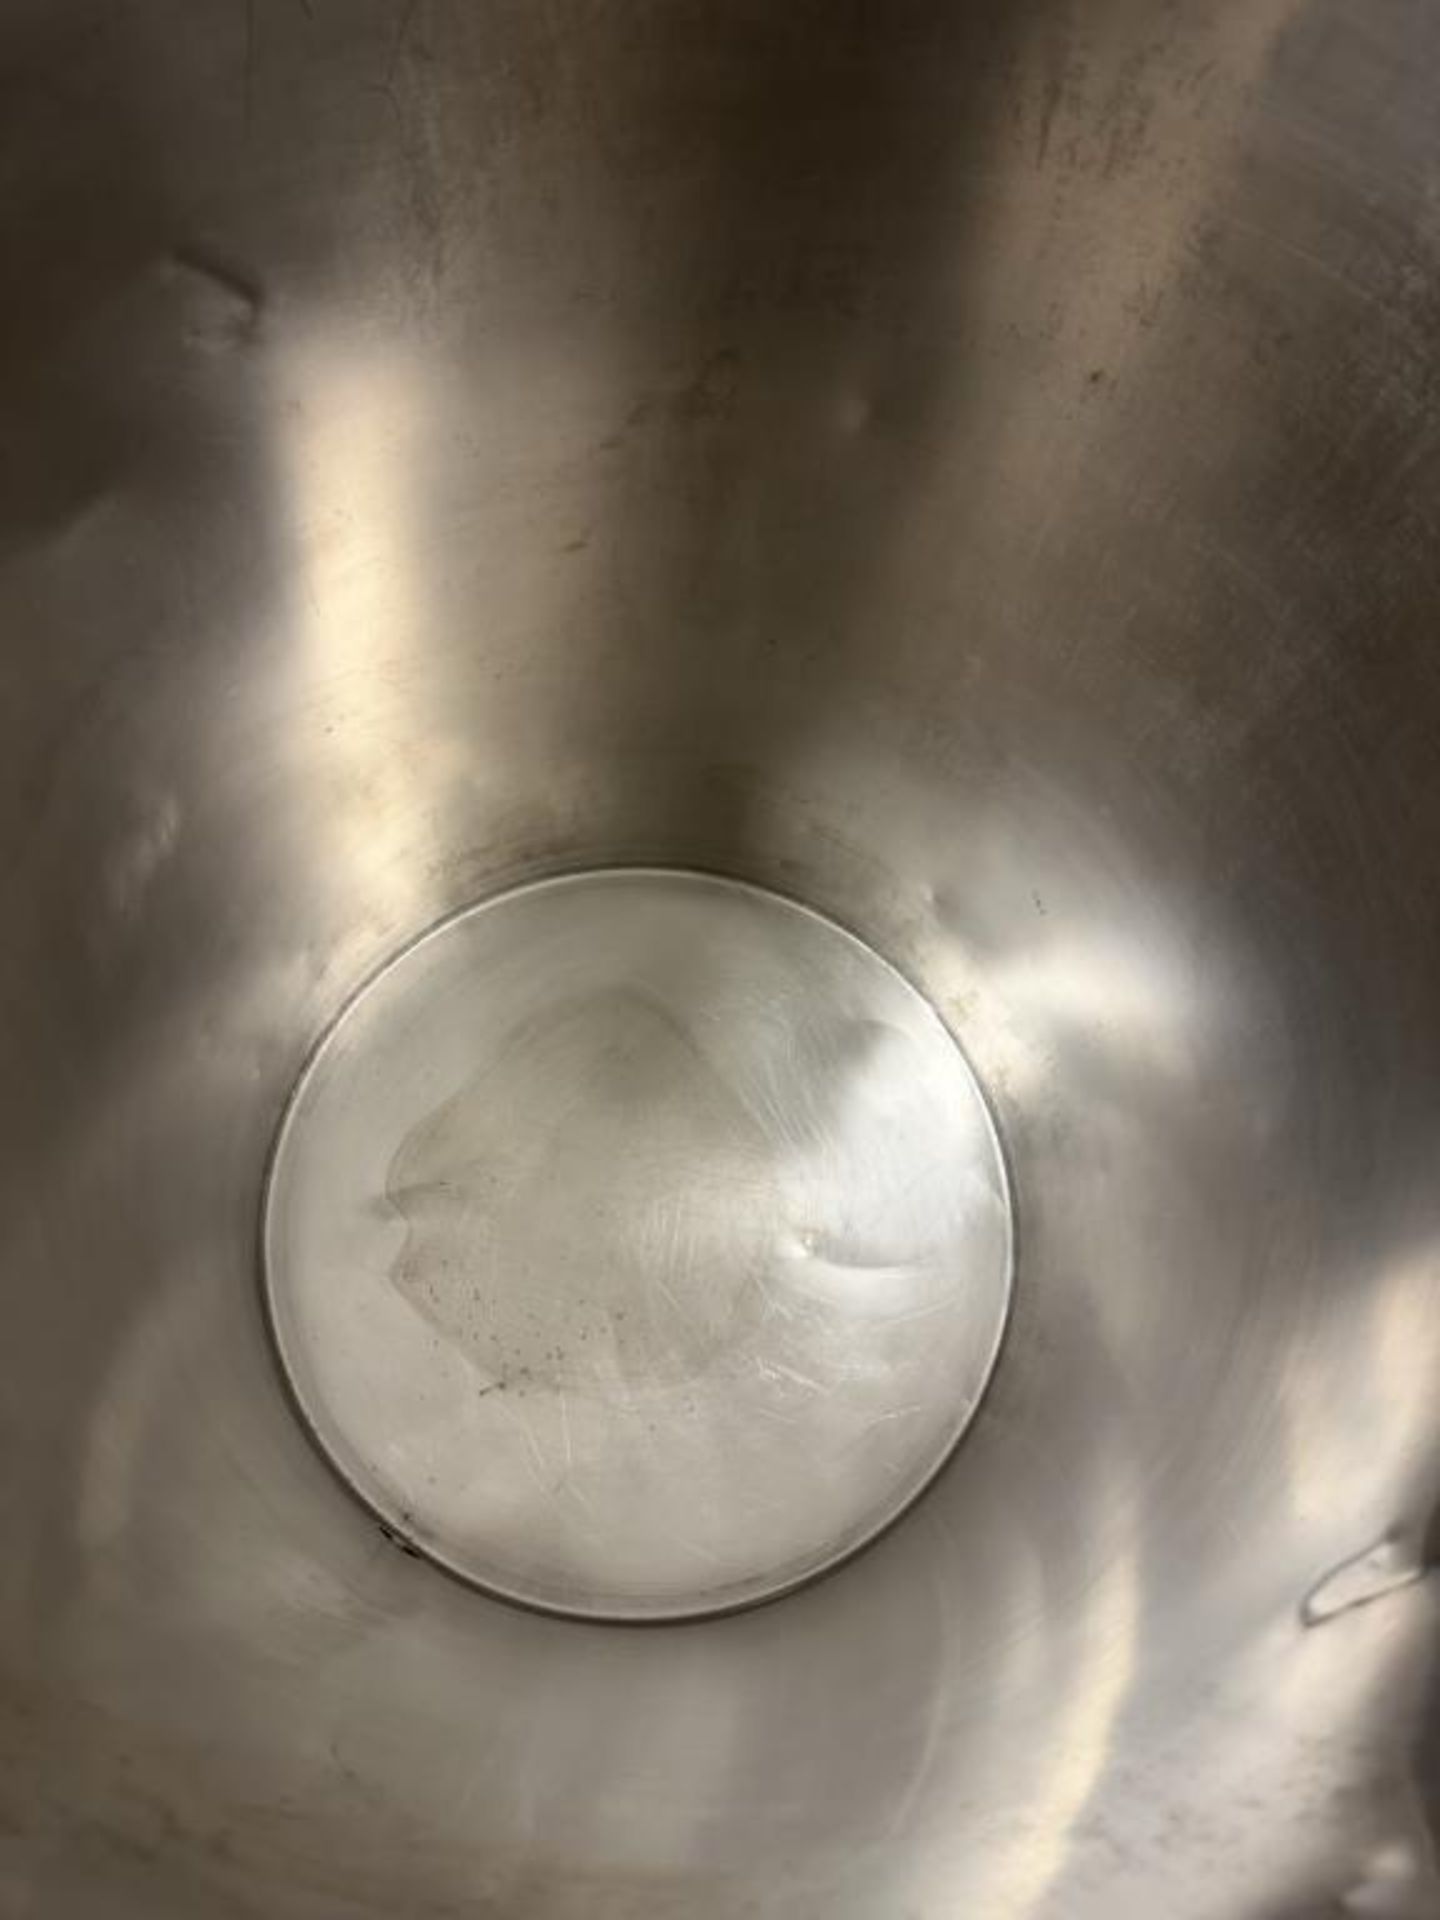 Stainless Steel Tank - Image 3 of 3